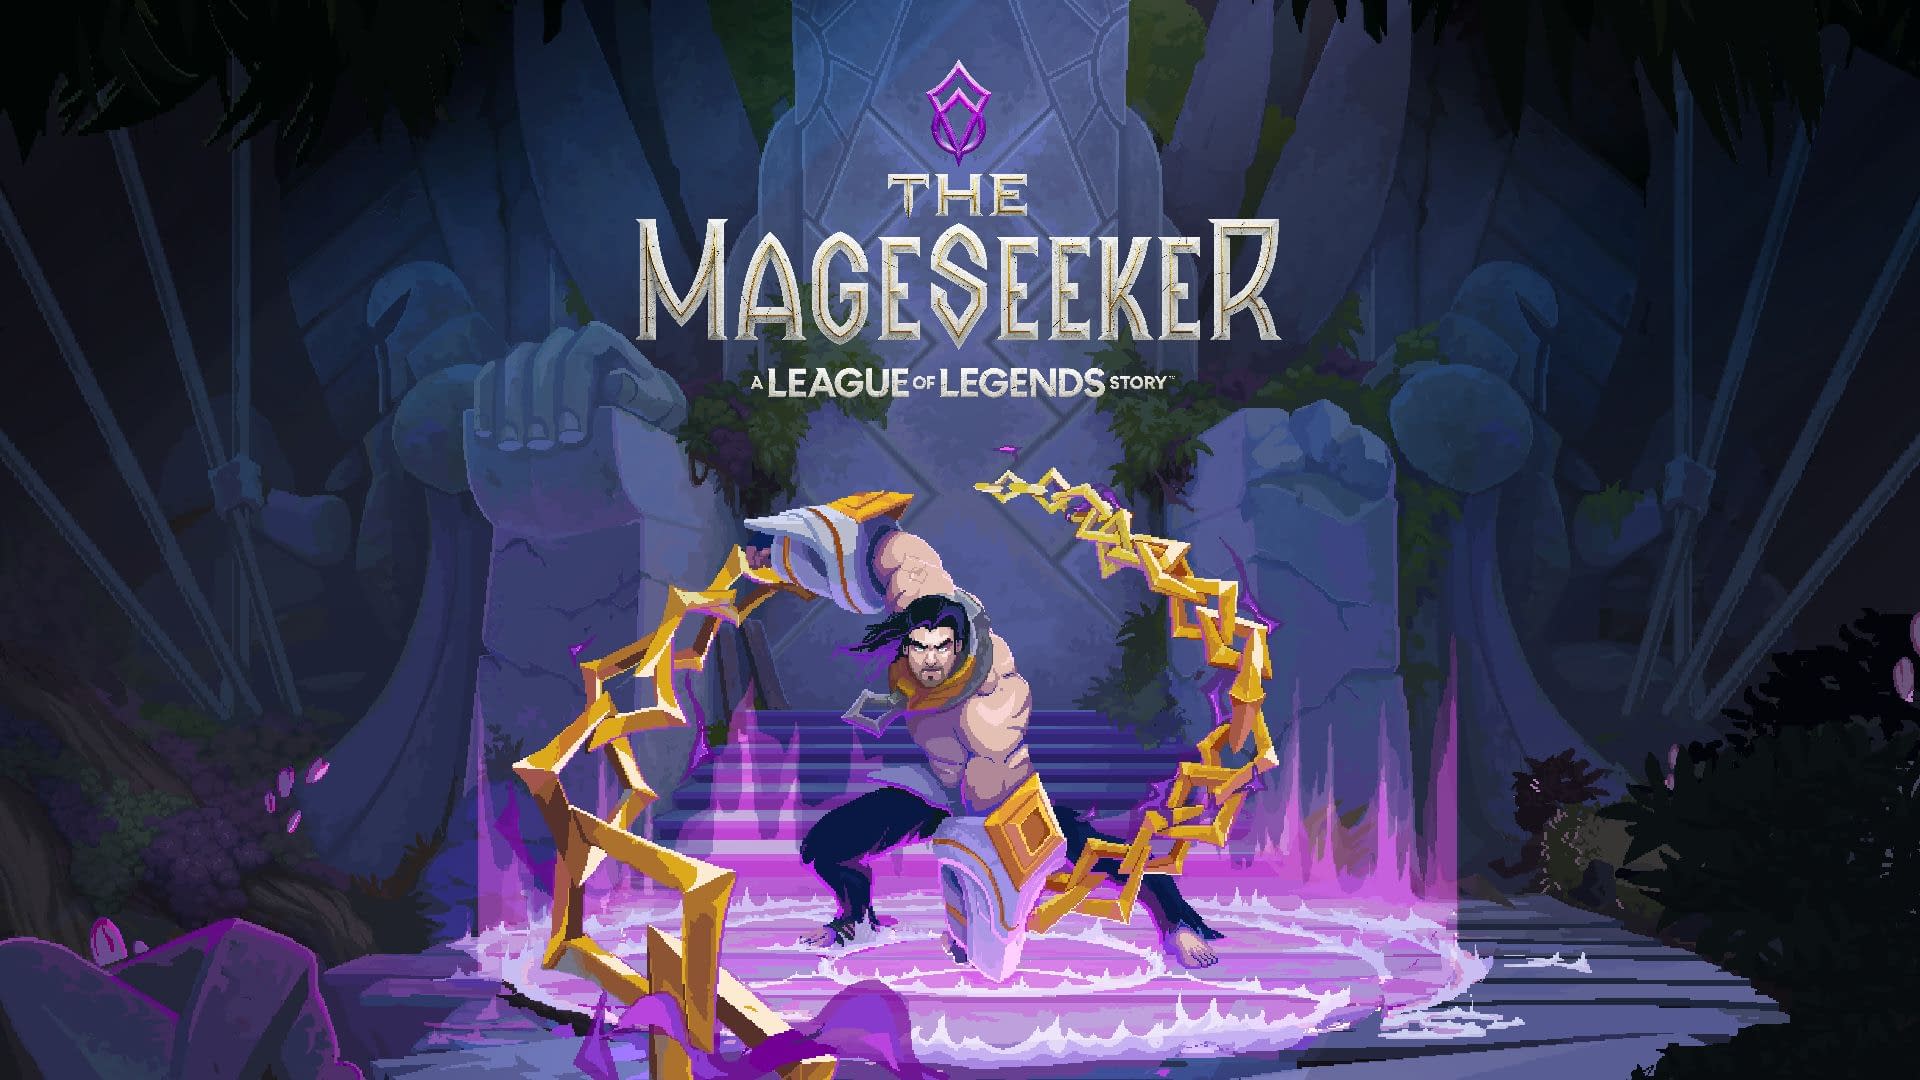 League of Legends' auto chess comes to mobile on March 19th